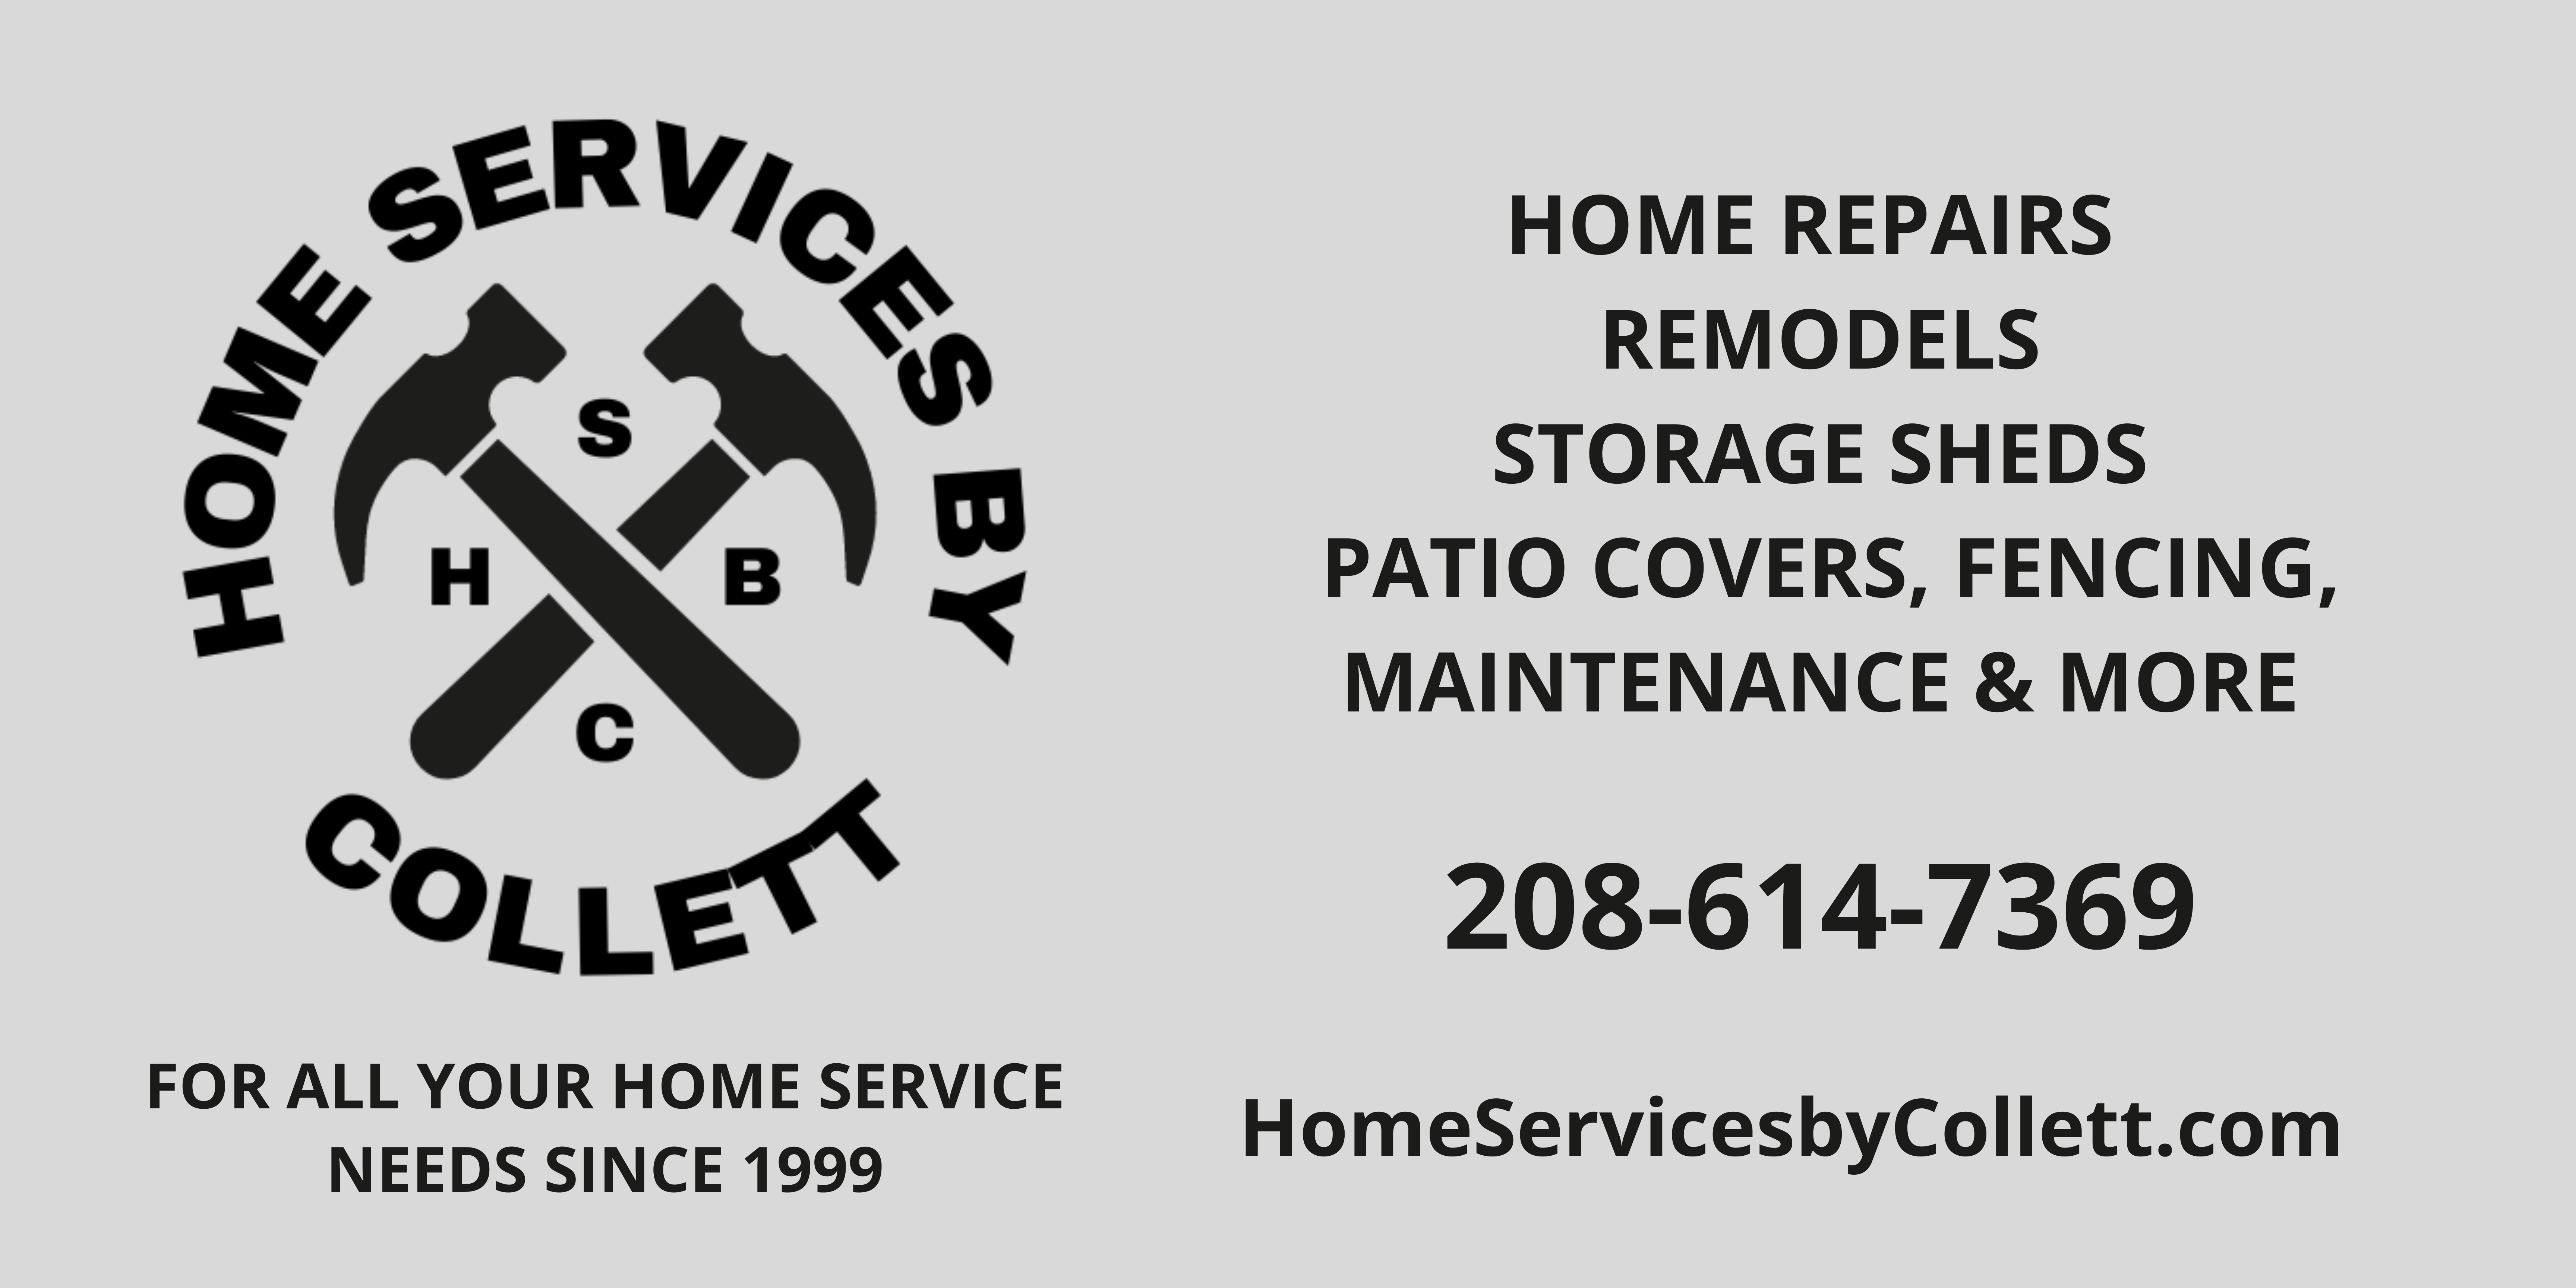 Home Services by Collett logo